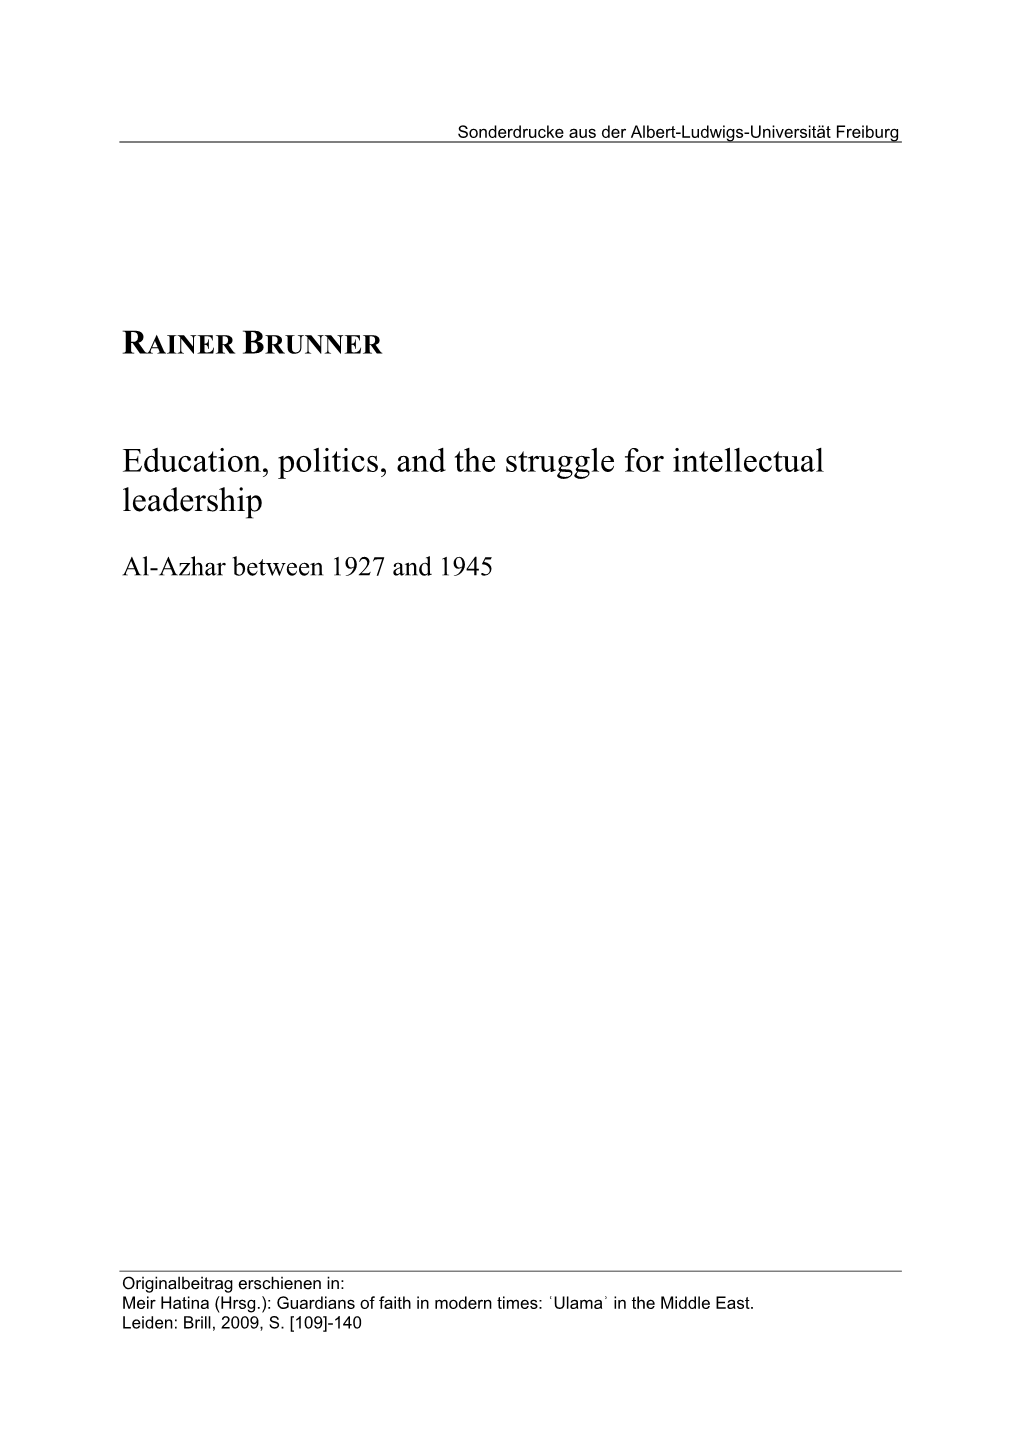 Education, Politics, and the Struggle for Intellectual Leadership